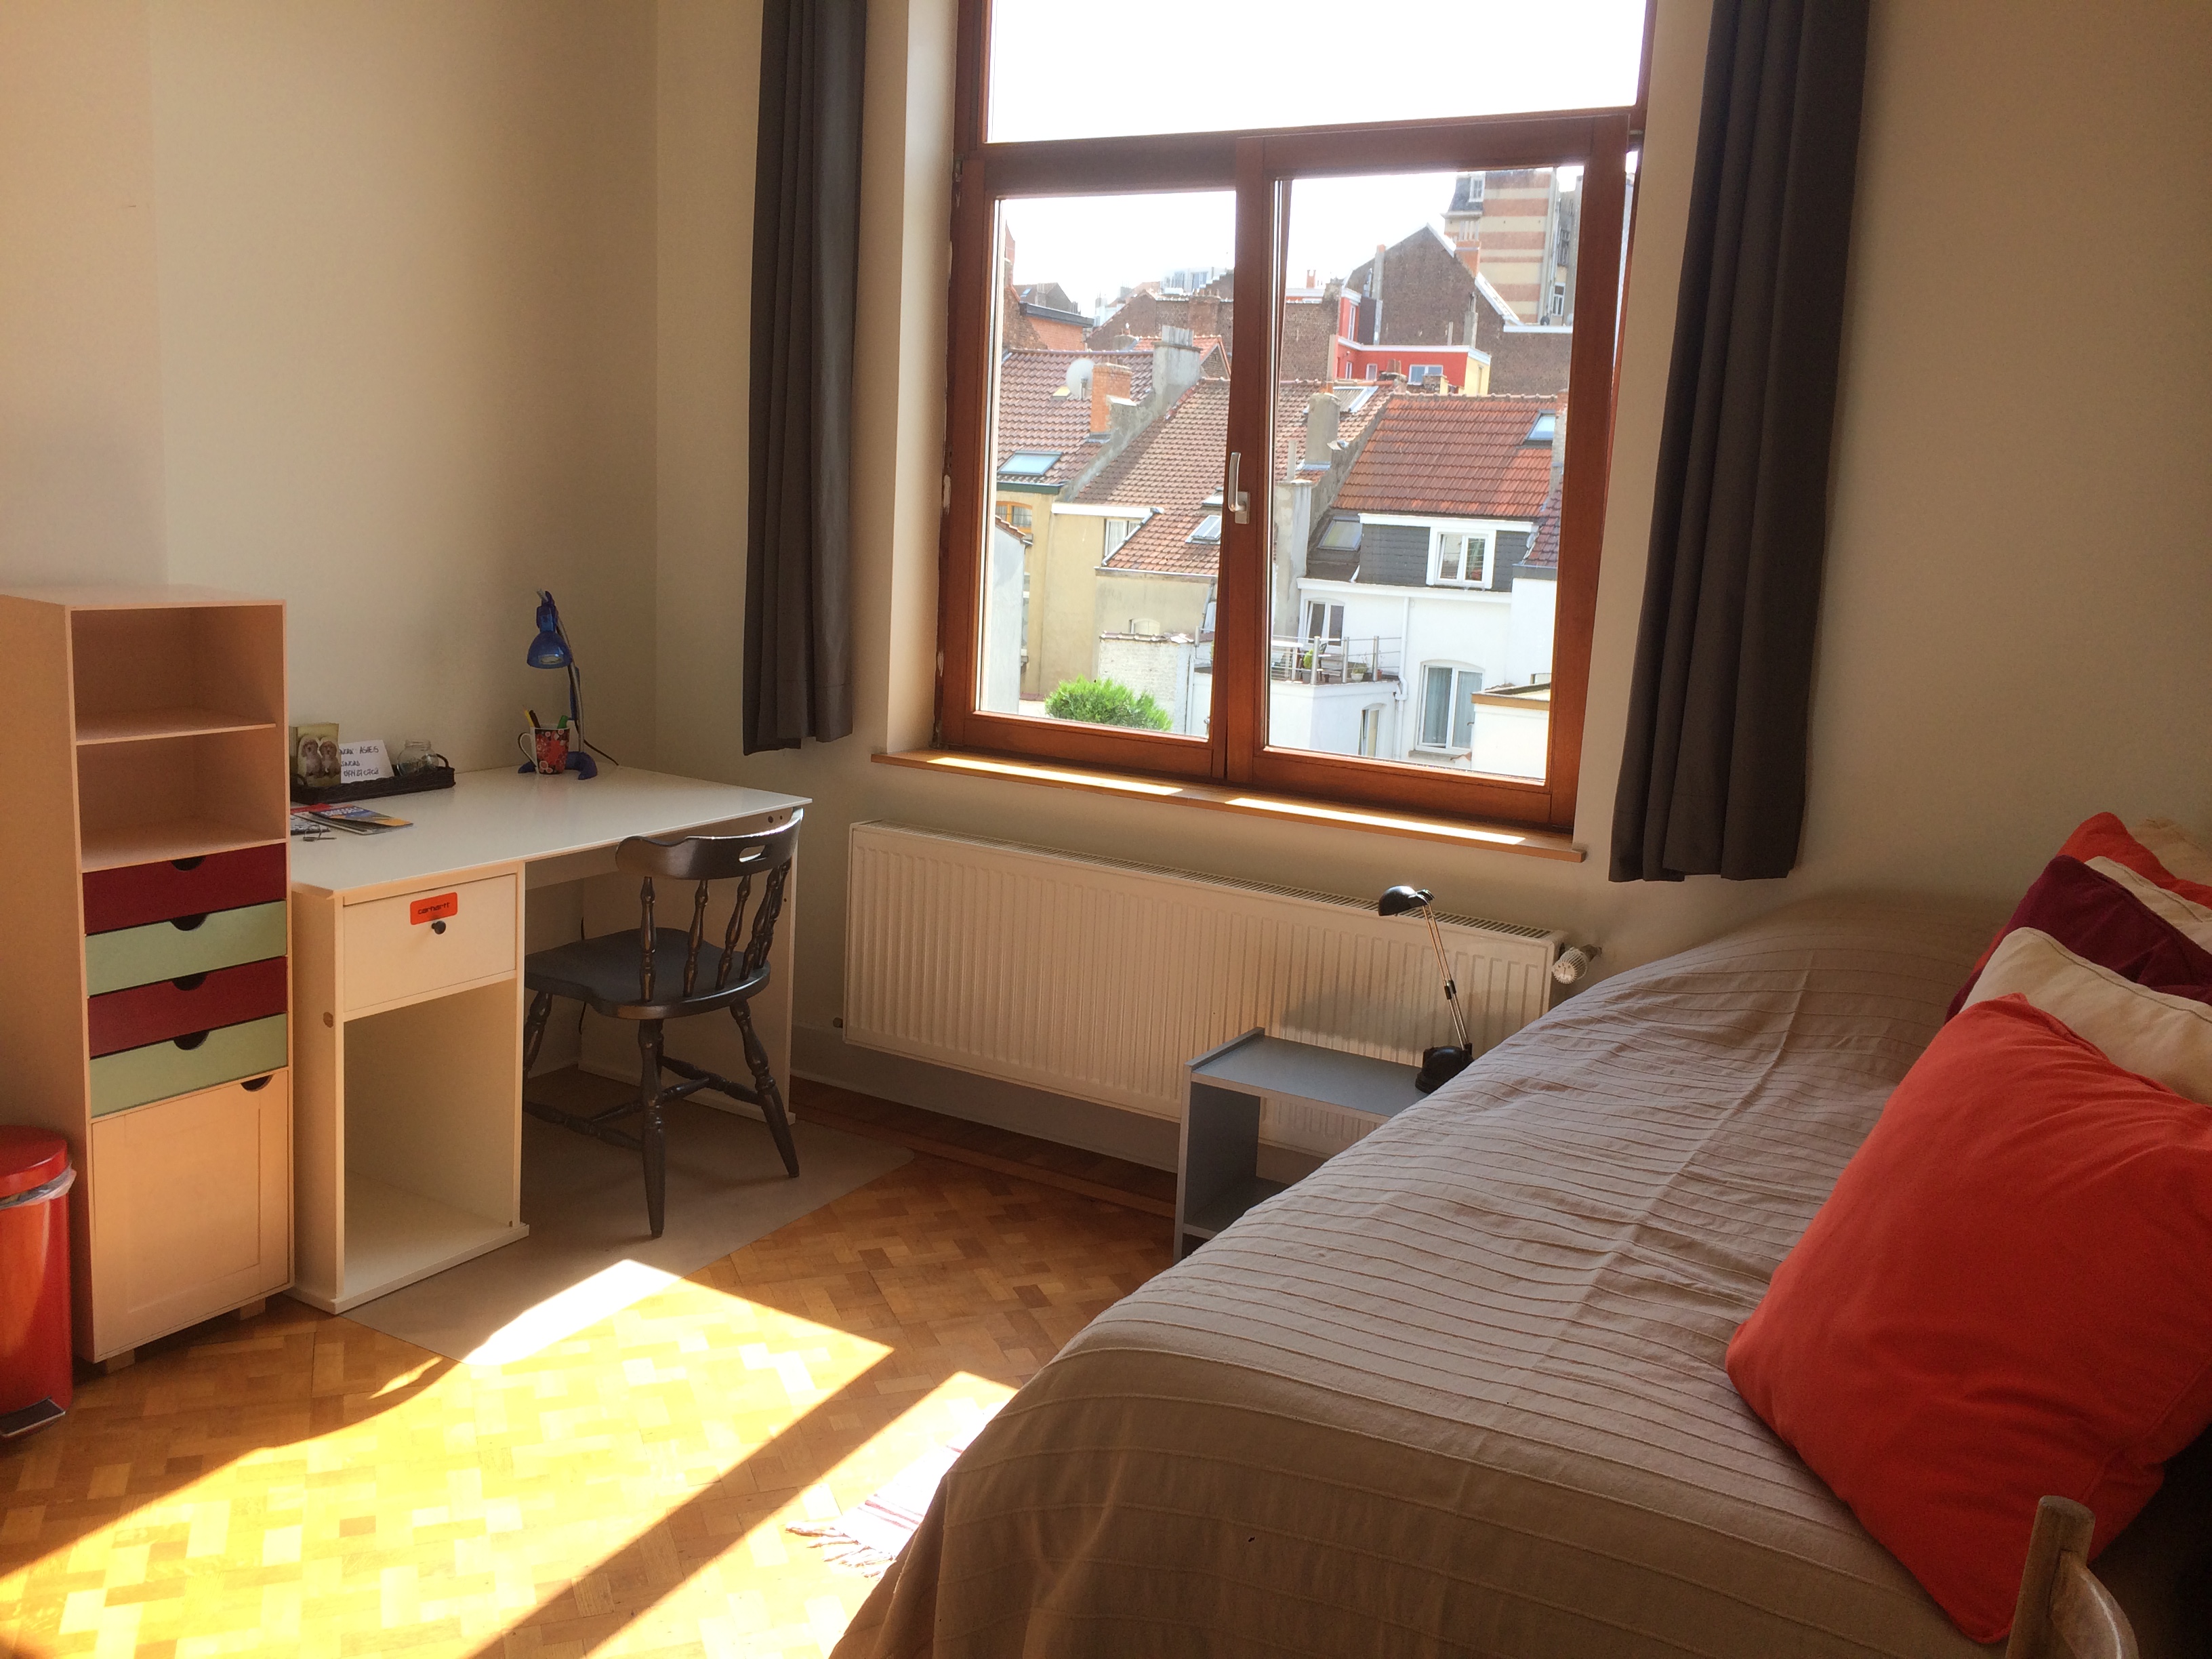 1 Room Available In EU Neighbourhood From Septembe